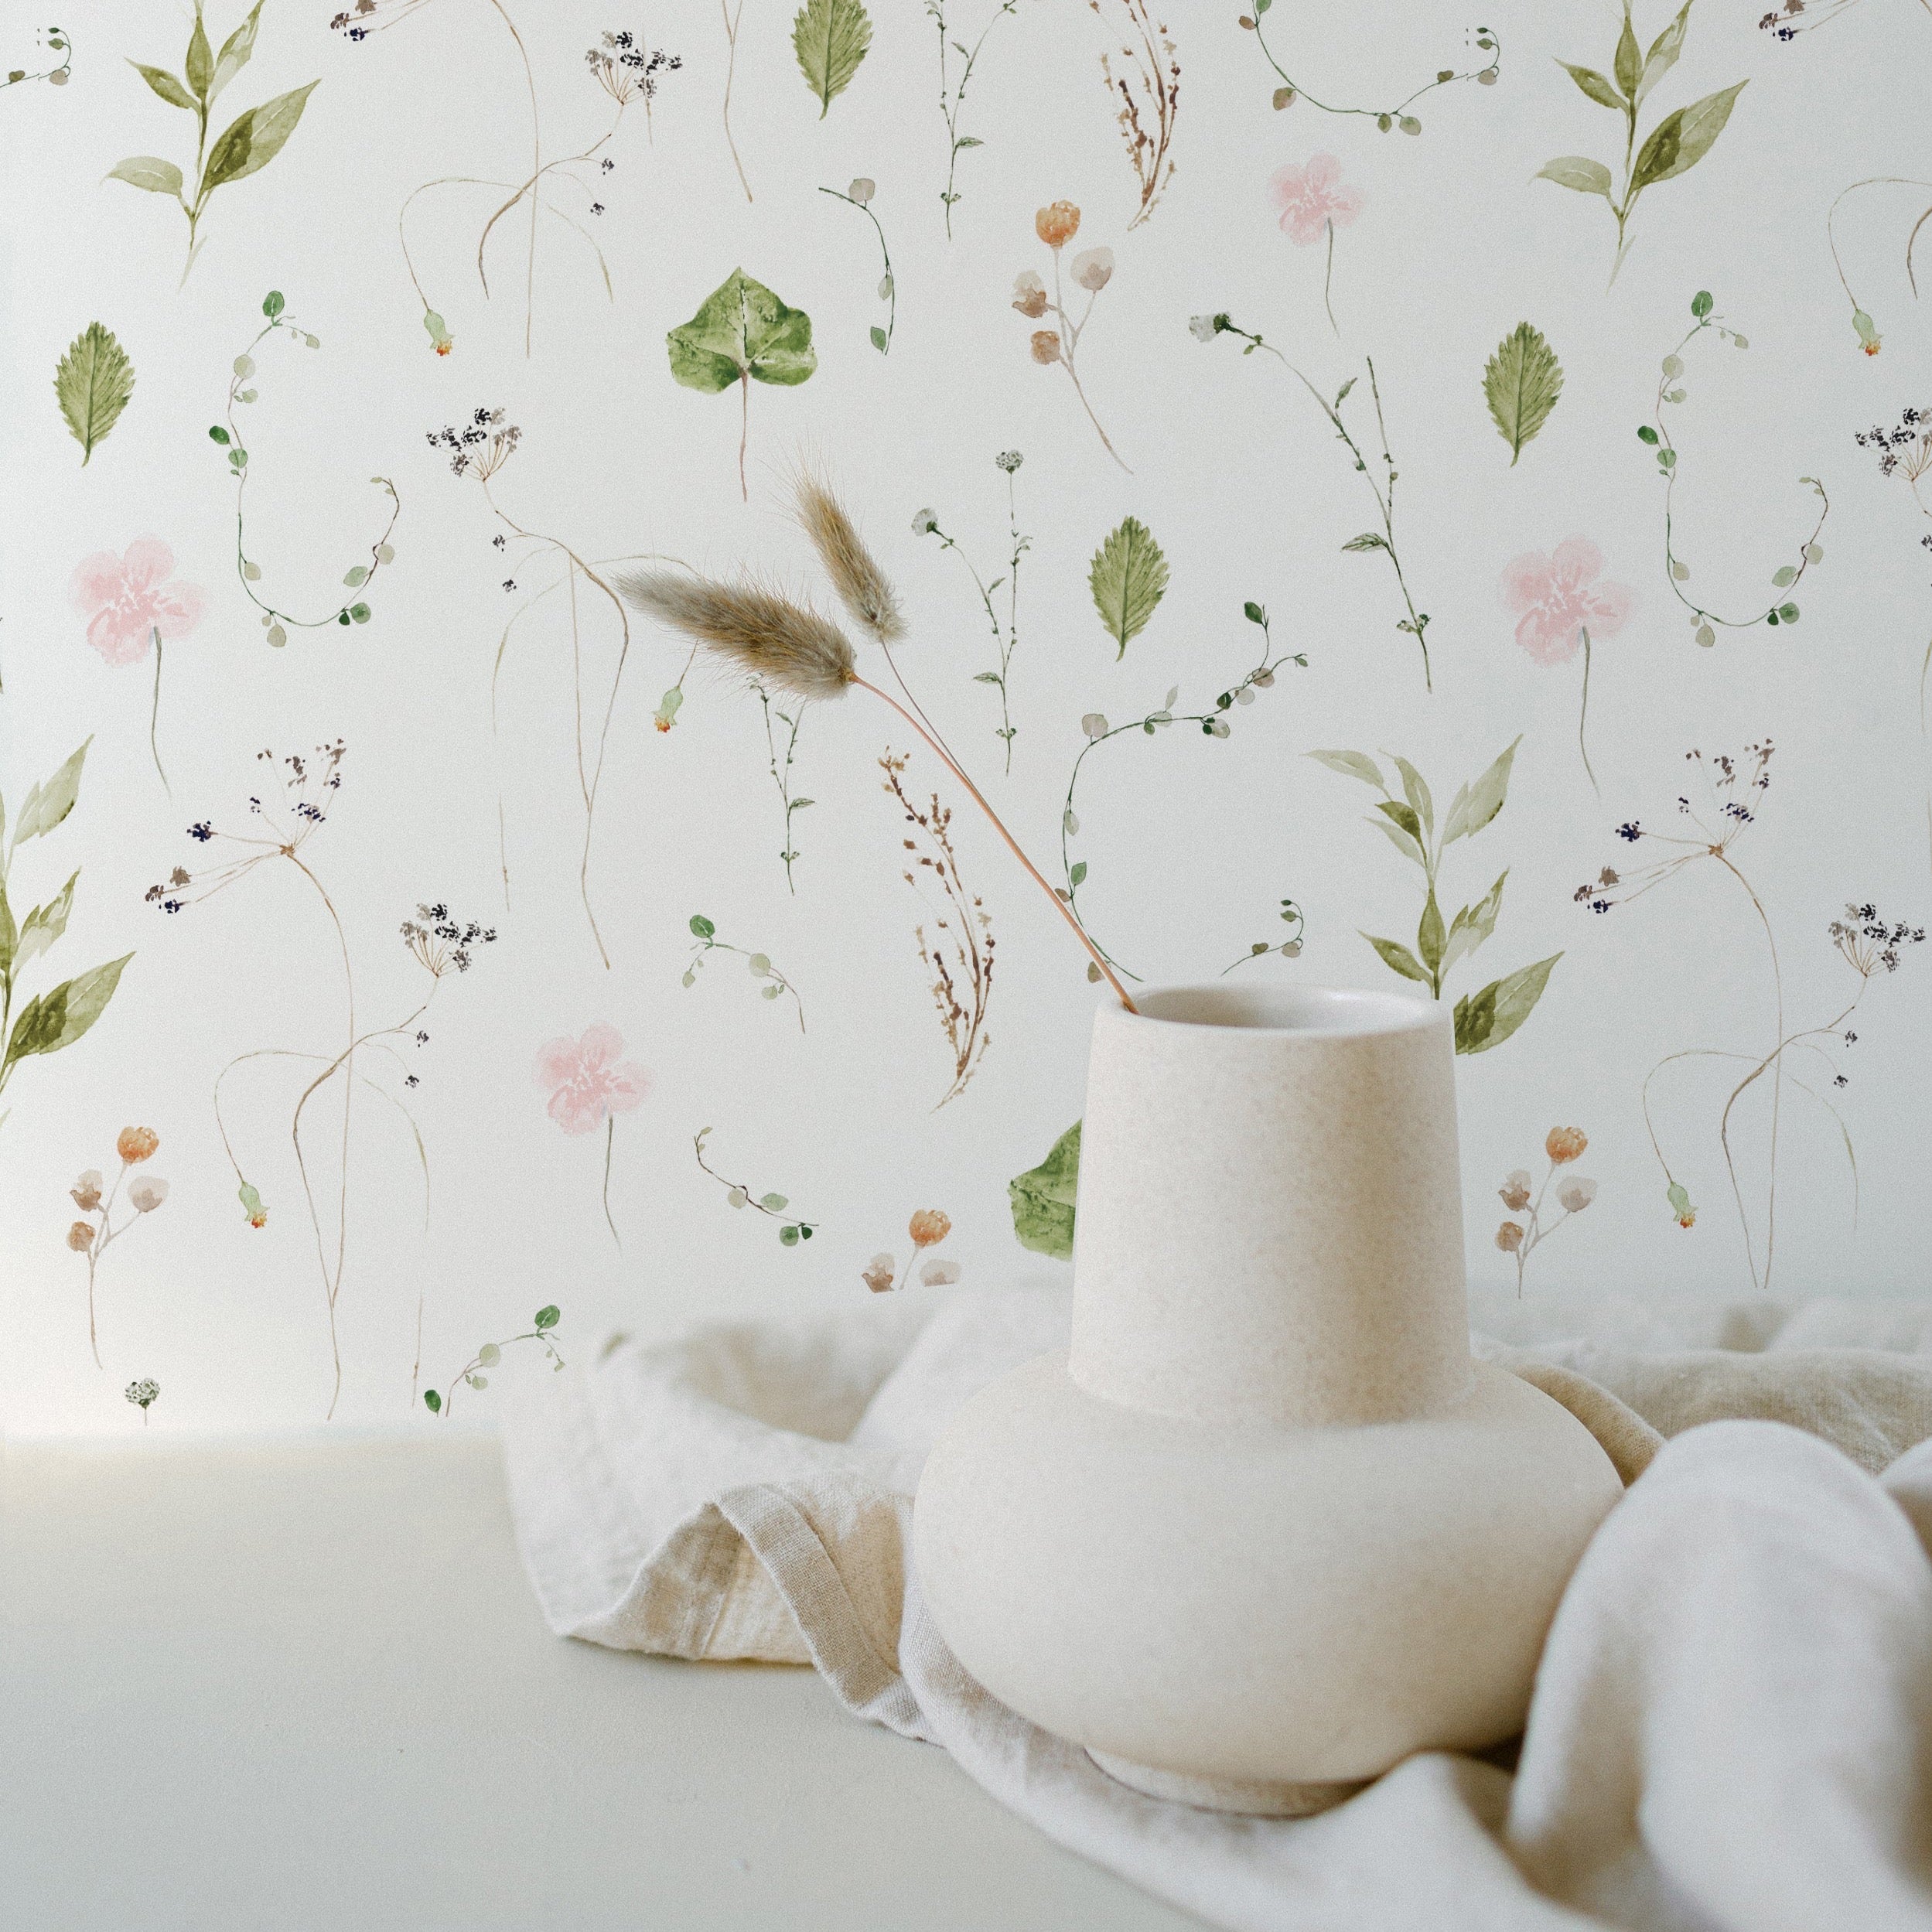 wallpaper, peel and stick wallpaper, Home decor, floral wallpaper, watercolor floral wallpaper, bedroom wallpaper, green wallpaper, pink wallpaper, ikebana wallpapers, 